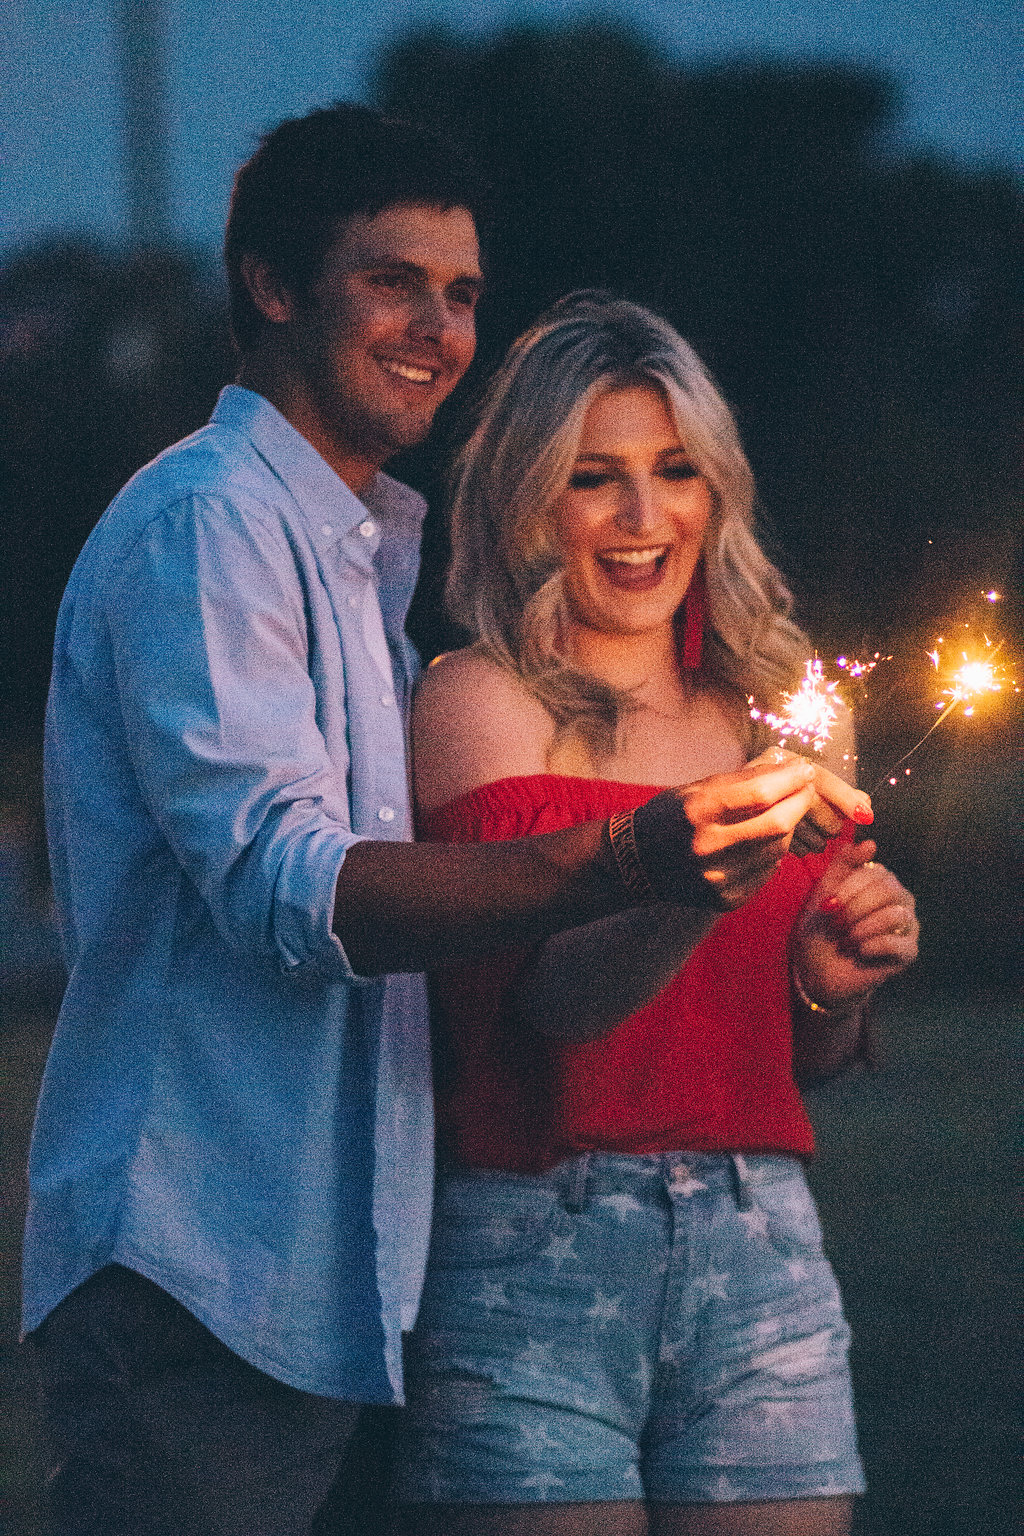 Fourth Of July | His and Her | Fashion and lifestyle blogger Audrey Madison Stowe